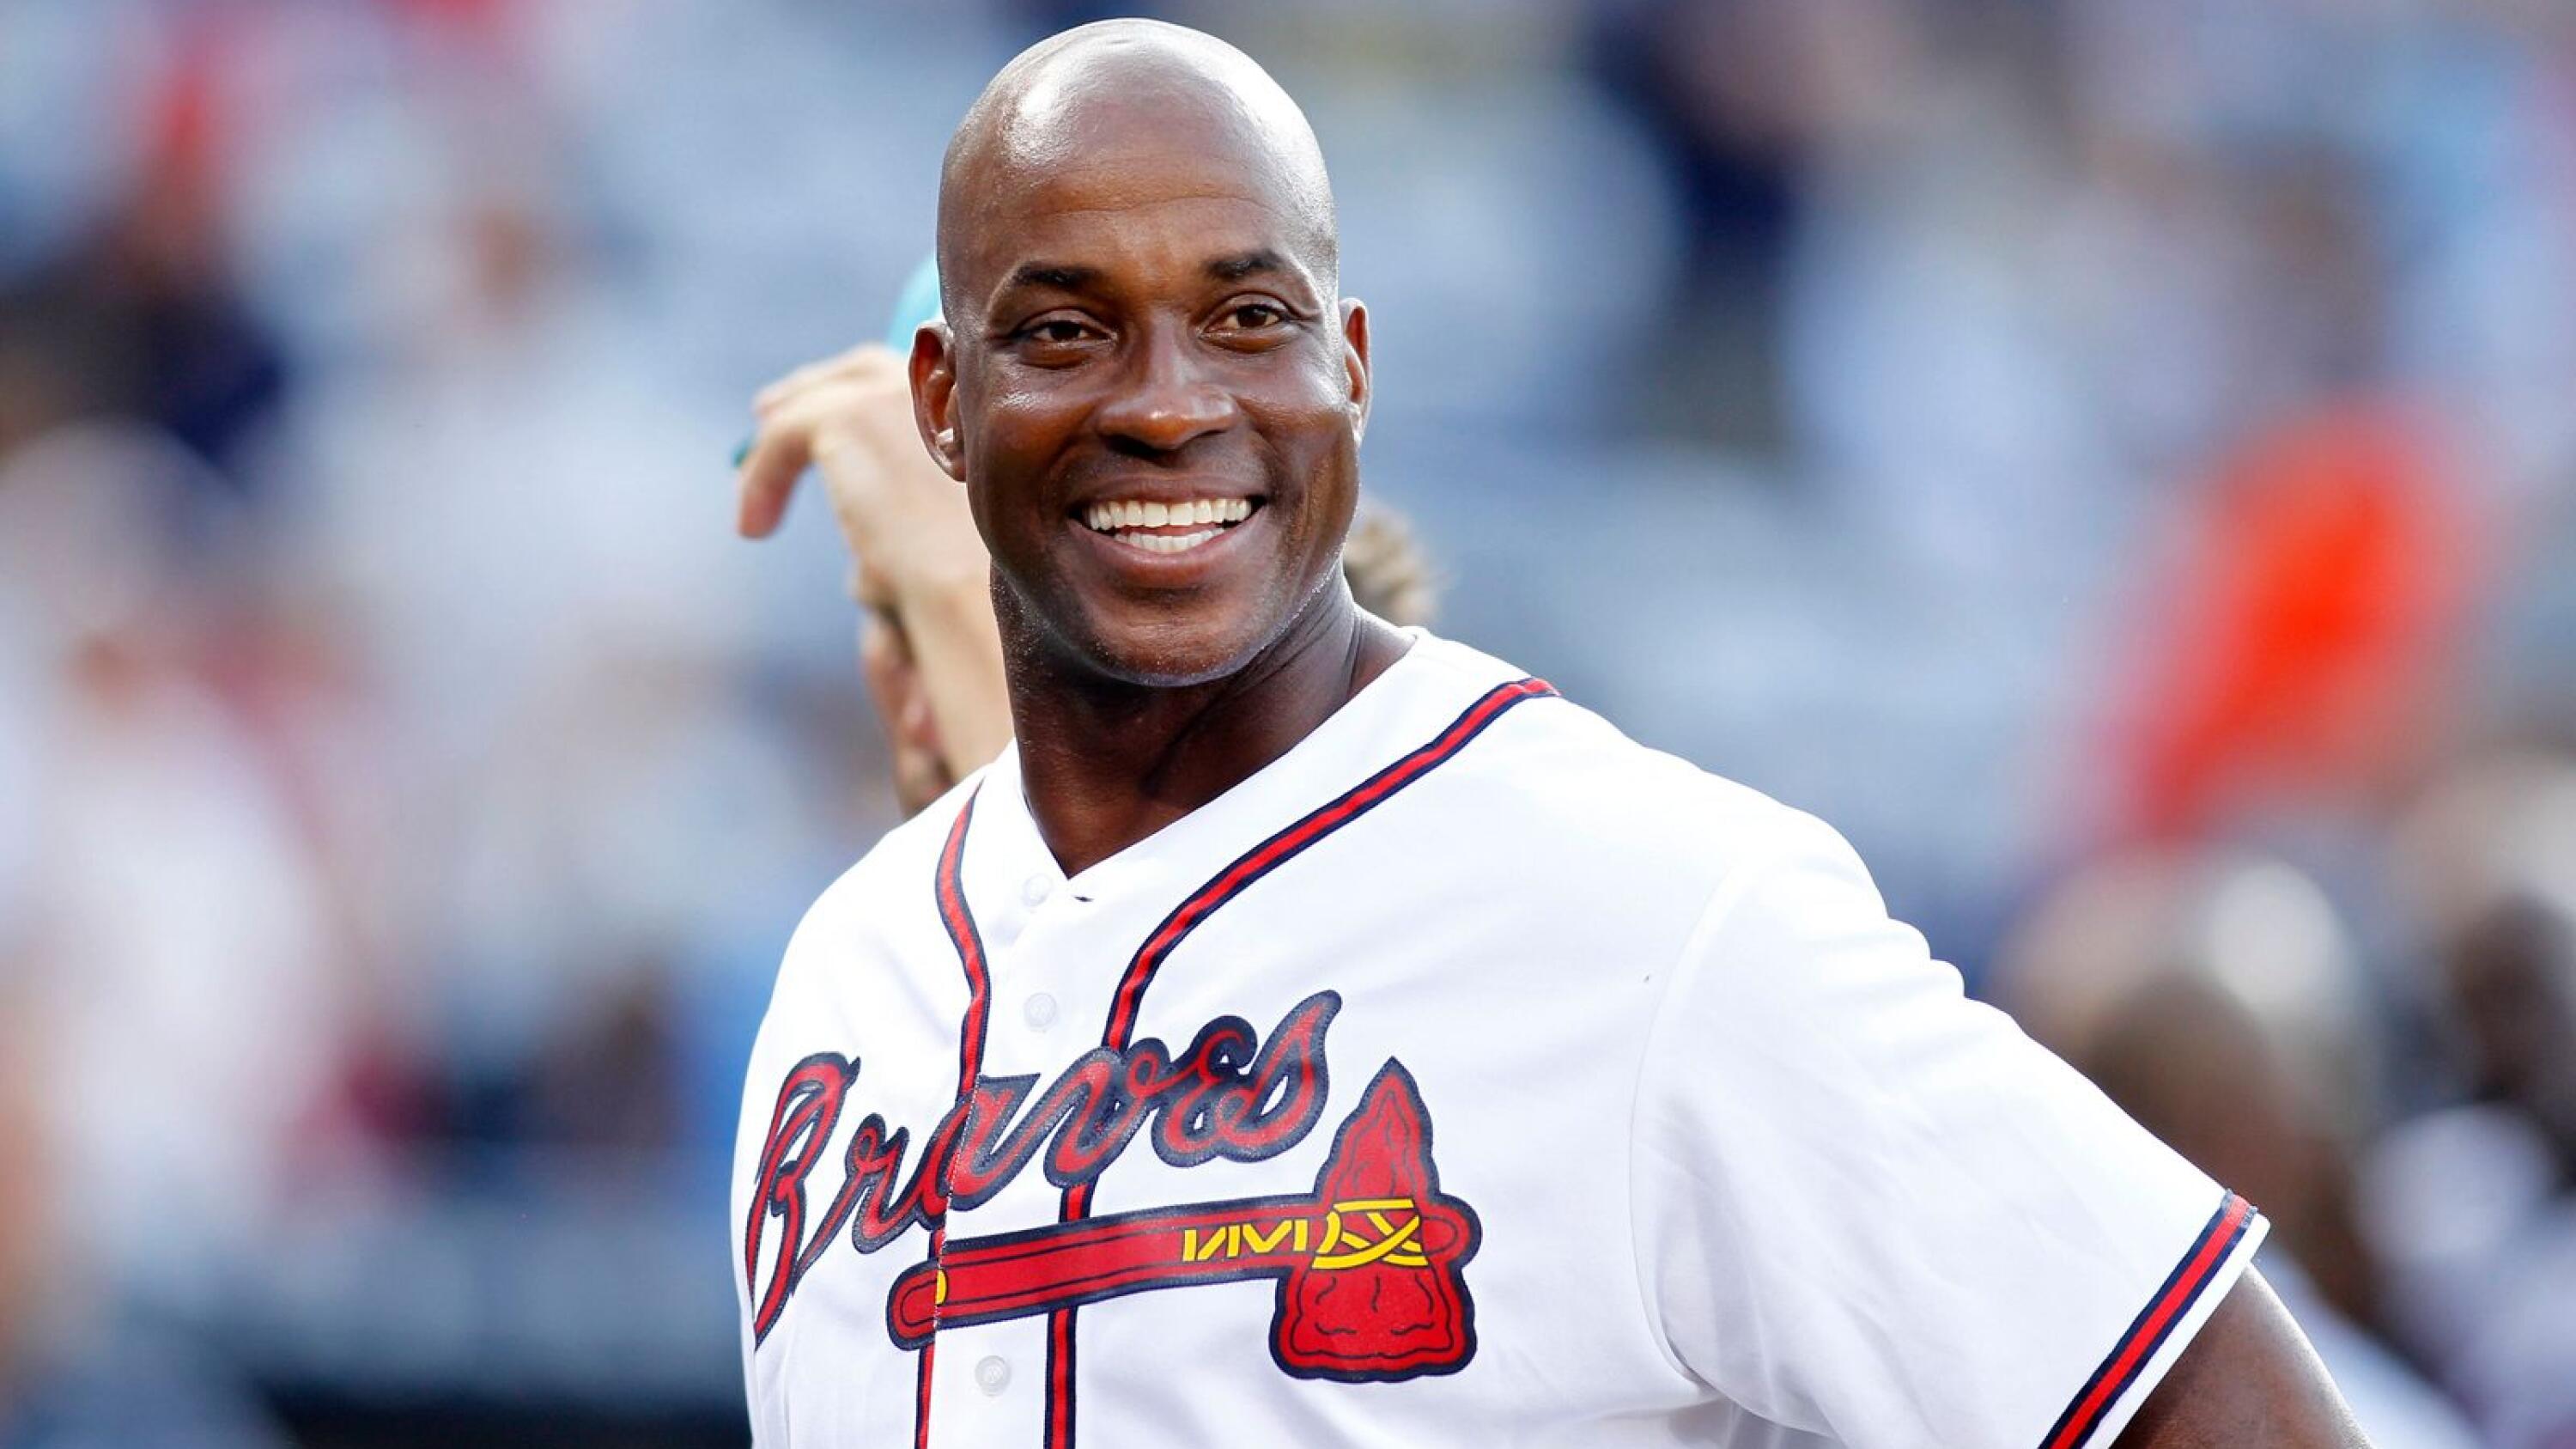 McGriff elected to Baseball Hall; Bonds, Clemens left out again